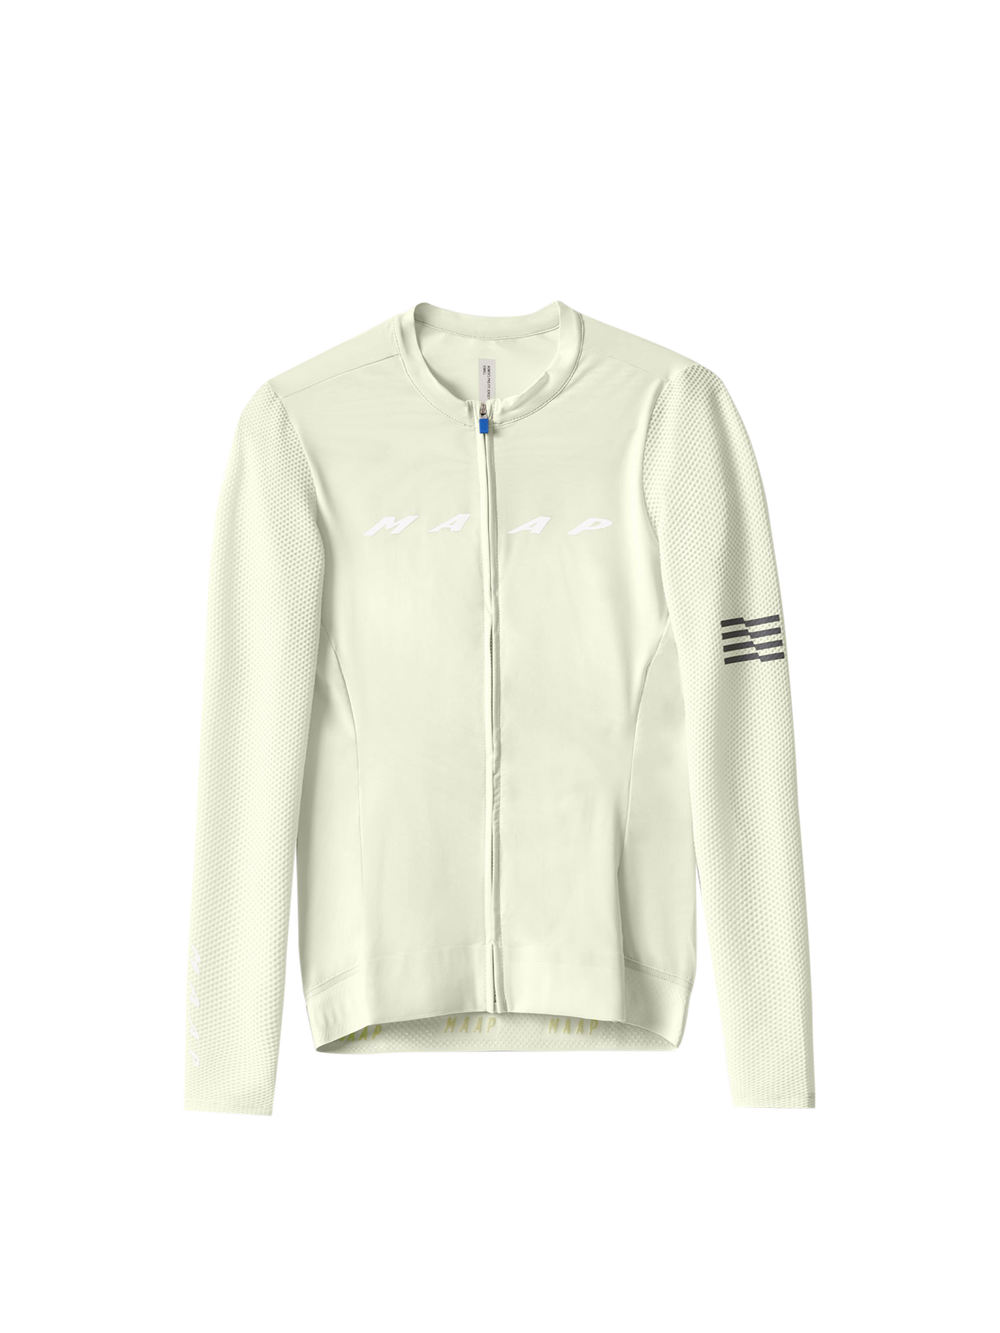 Product Image for Women's Evade Pro Base LS Jersey 2.0